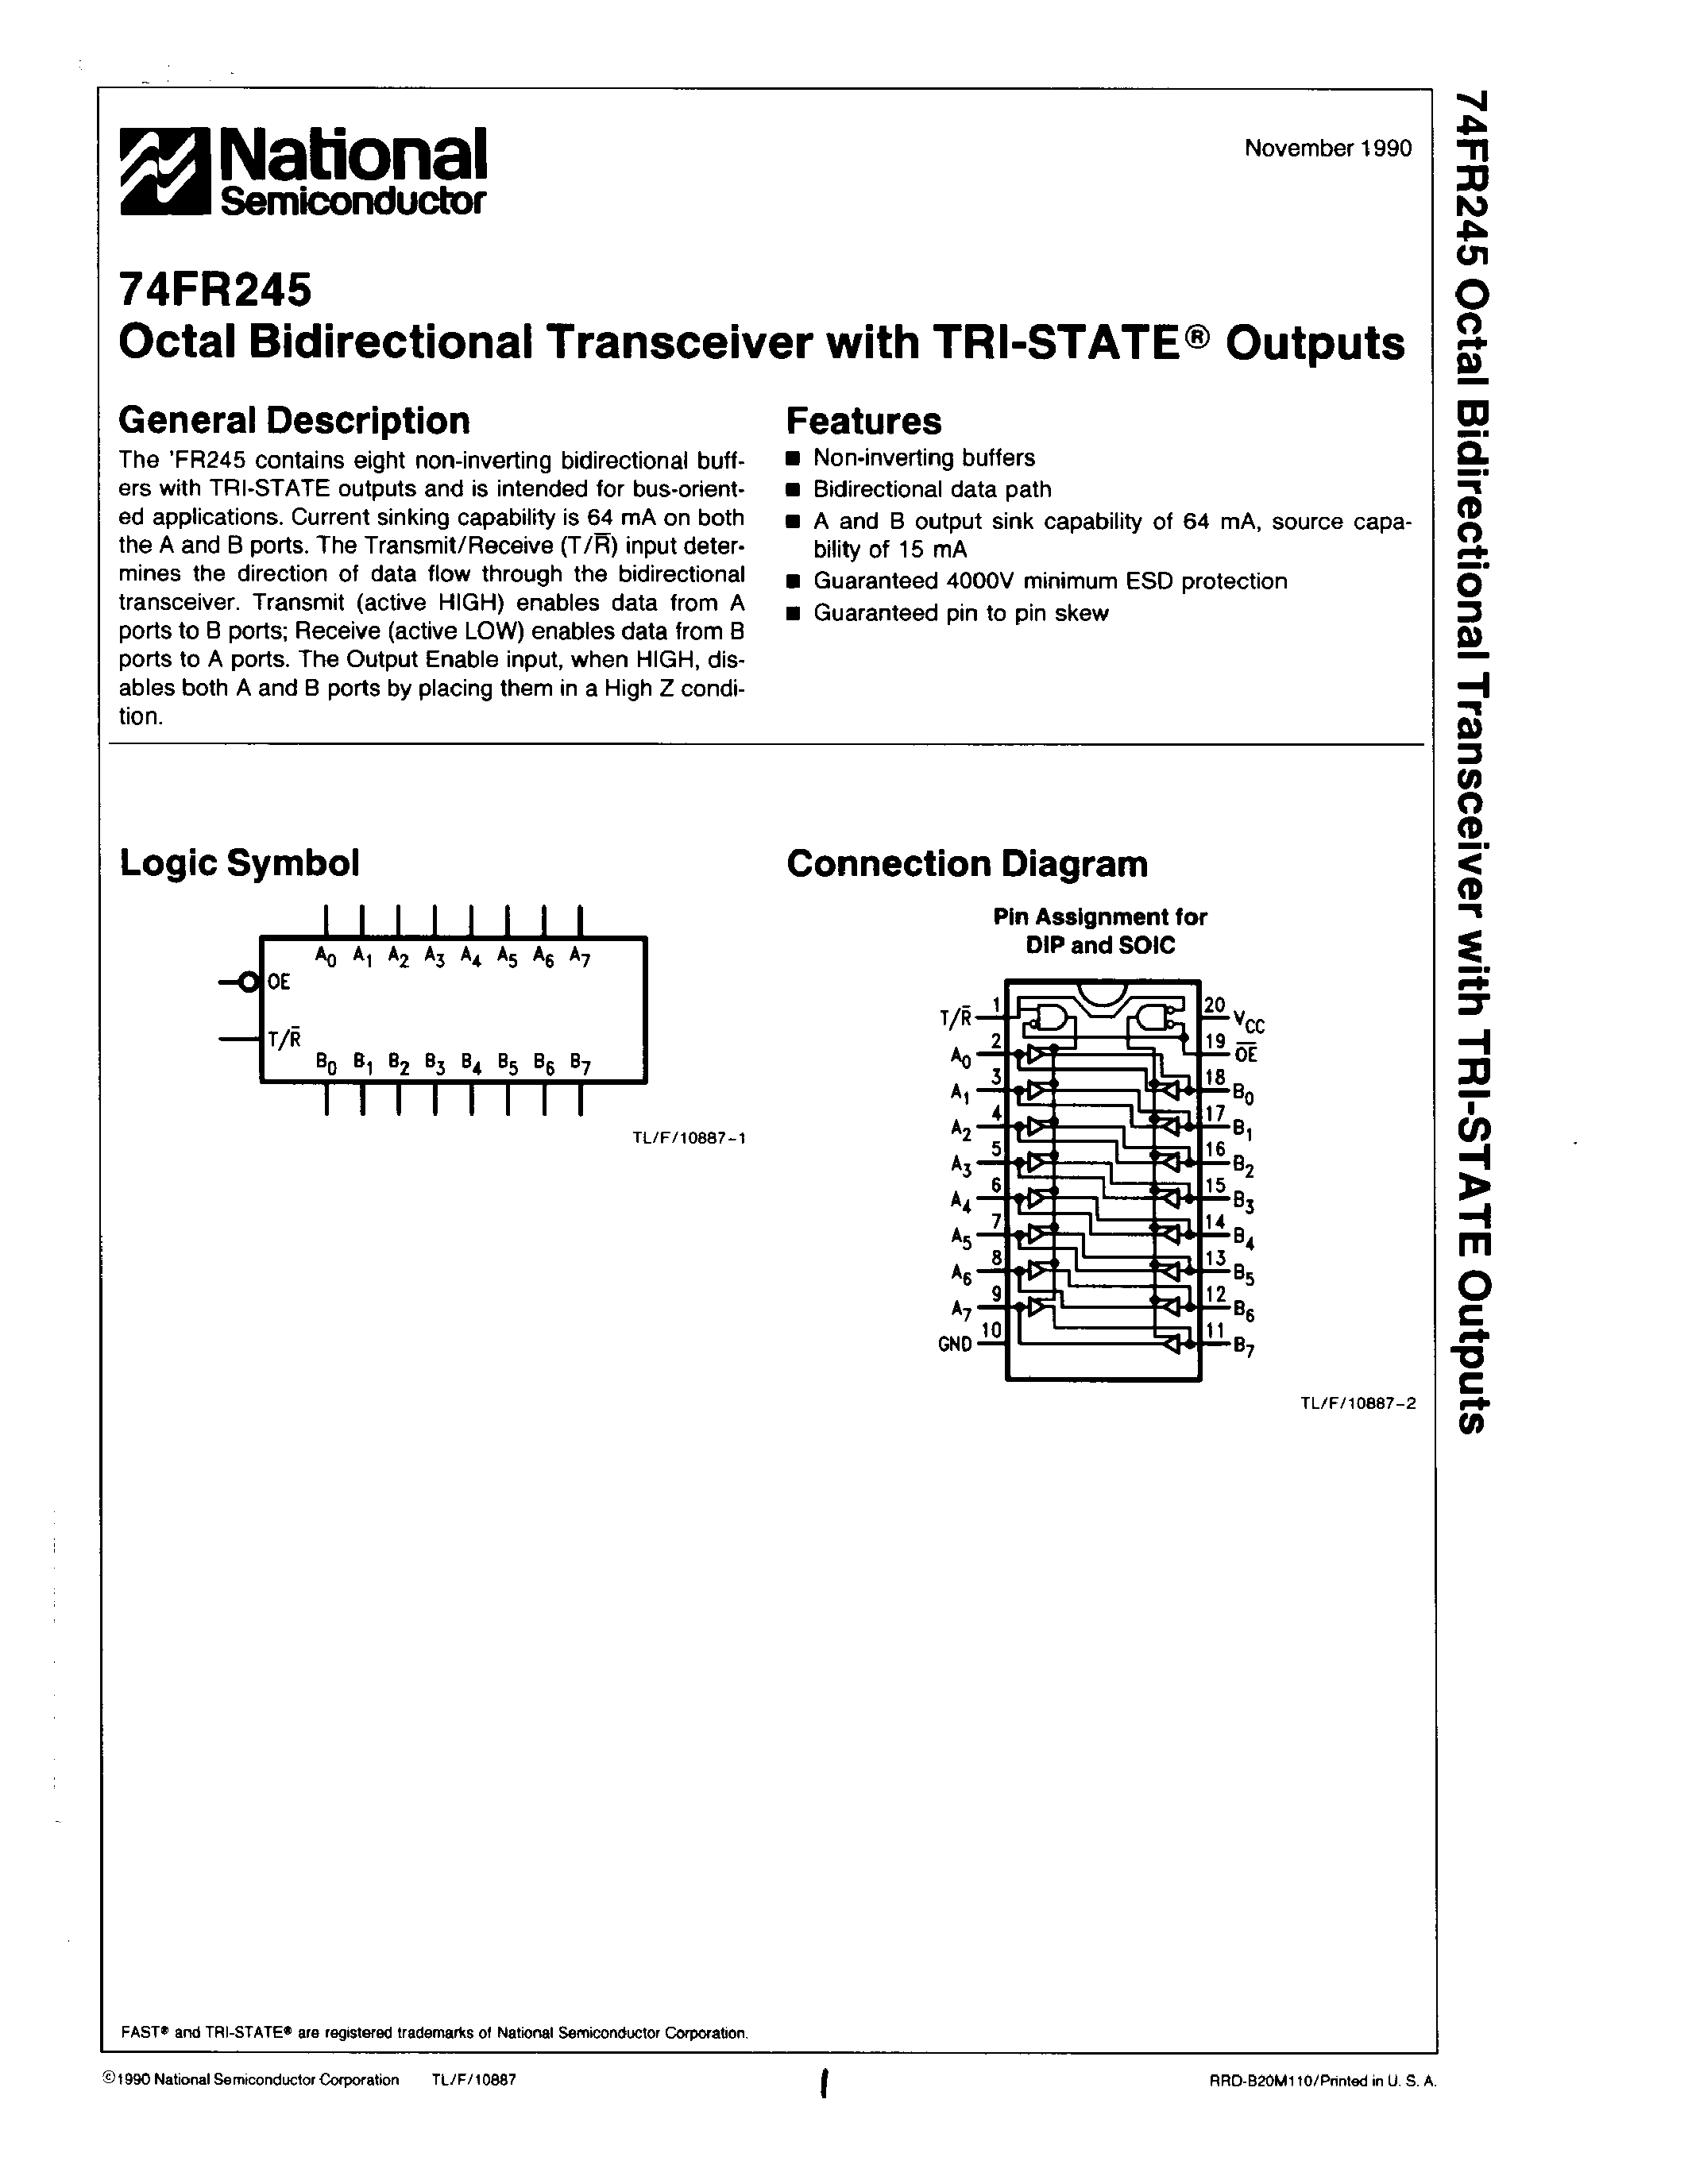 Даташит 74FR245-Octal Bidirectional Transceiver with TRI-STATE Outputs страница 1